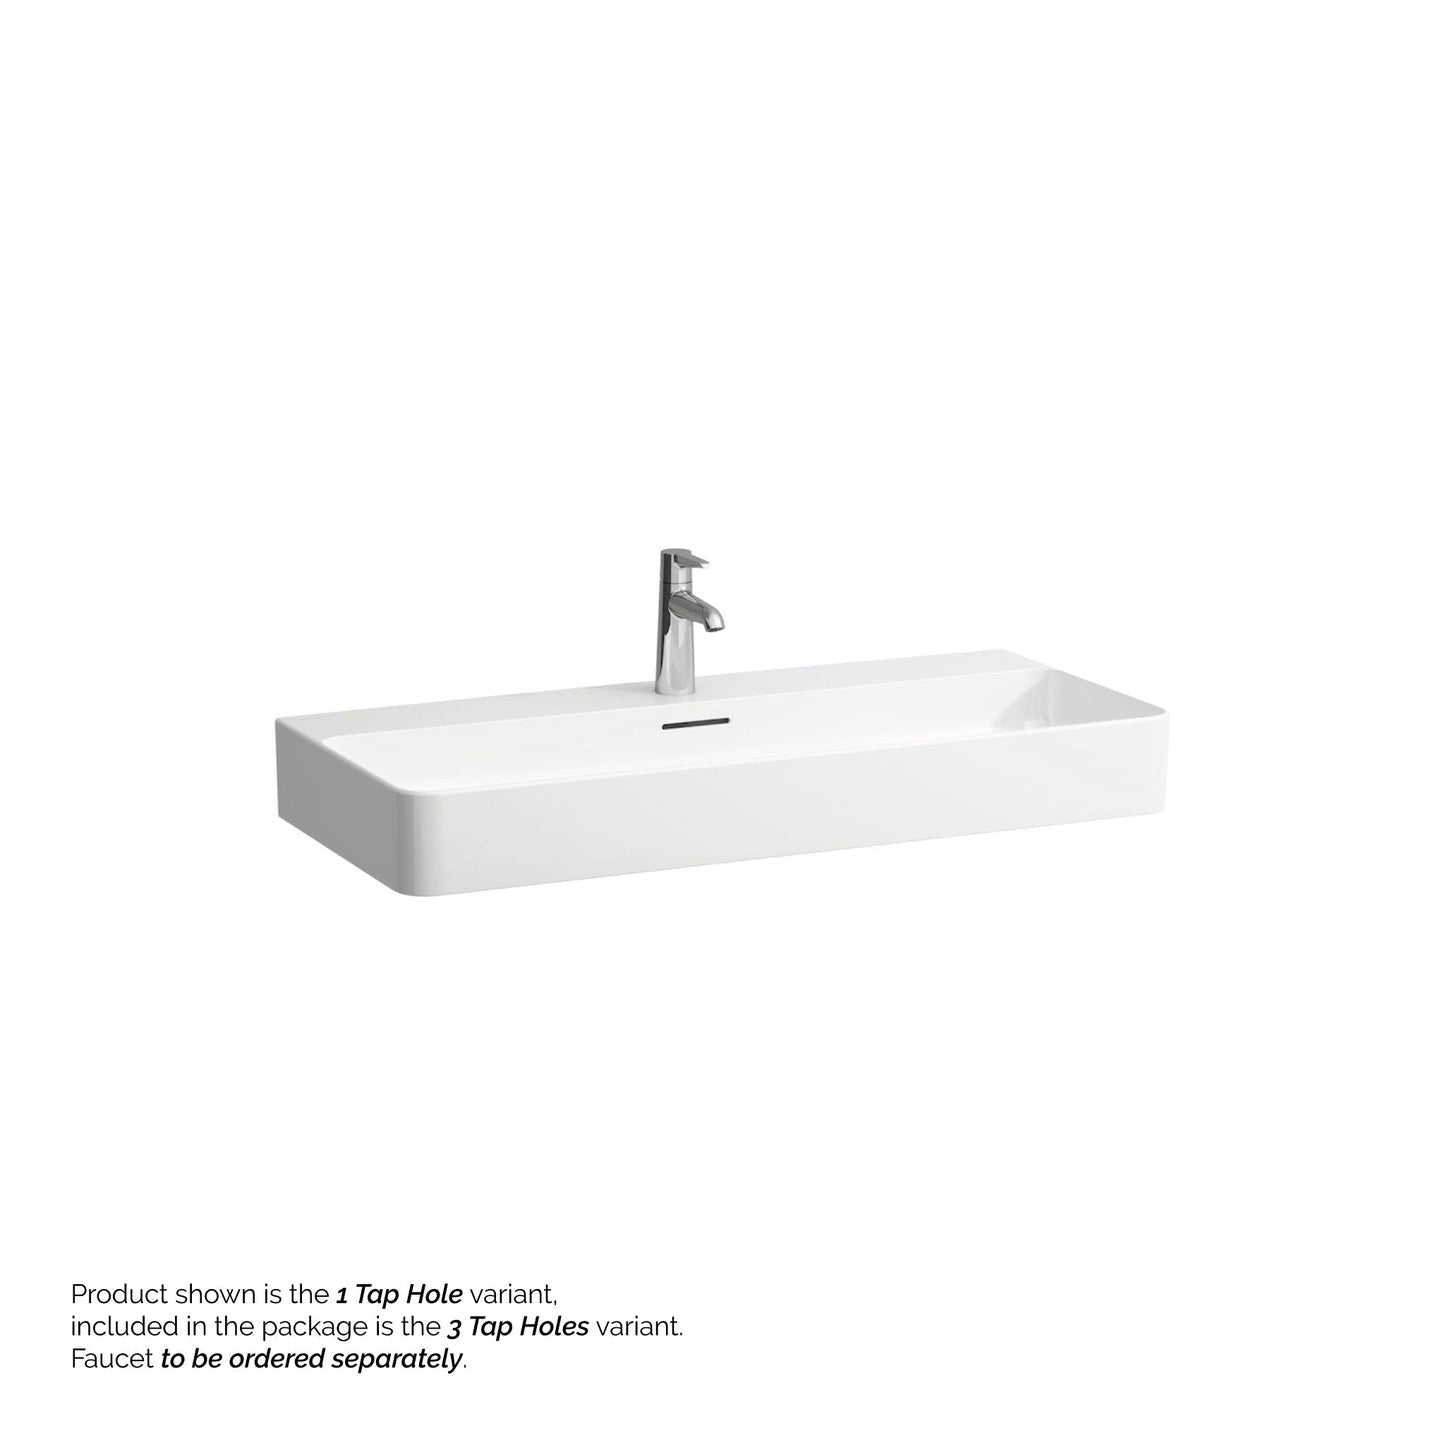 Laufen Val 37" x 17" Matte White Ceramic Countertop Bathroom Sink With 3 Faucet Holes